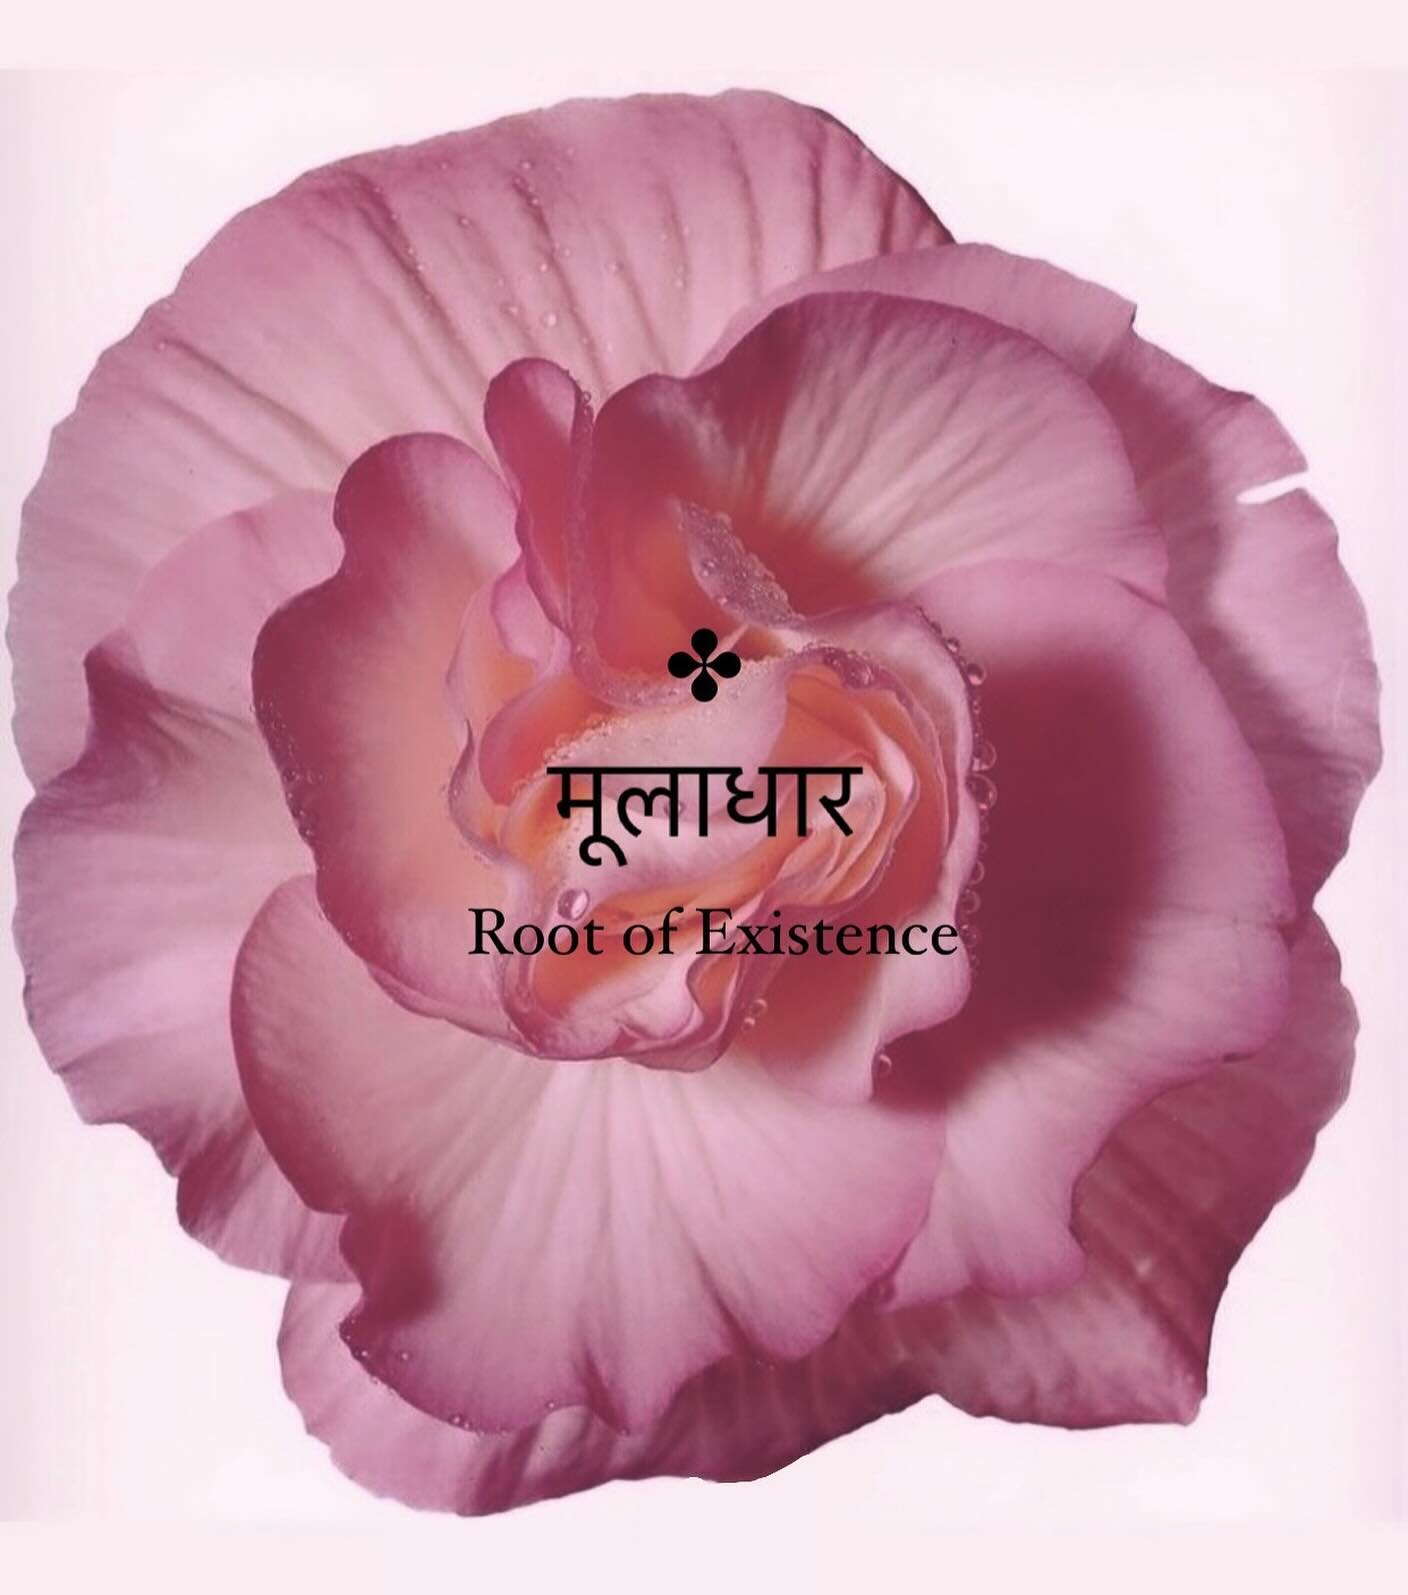 。゜✿ฺ Unlock and transcend ✿ฺ ゜。

:: Root of Existence - Pelvic Floor Peace and Power ::

The pelvic floor forms the grounded base of our being and our Earth connection. 
Playing an essential role in vital functions like breathing, moving and feeling 